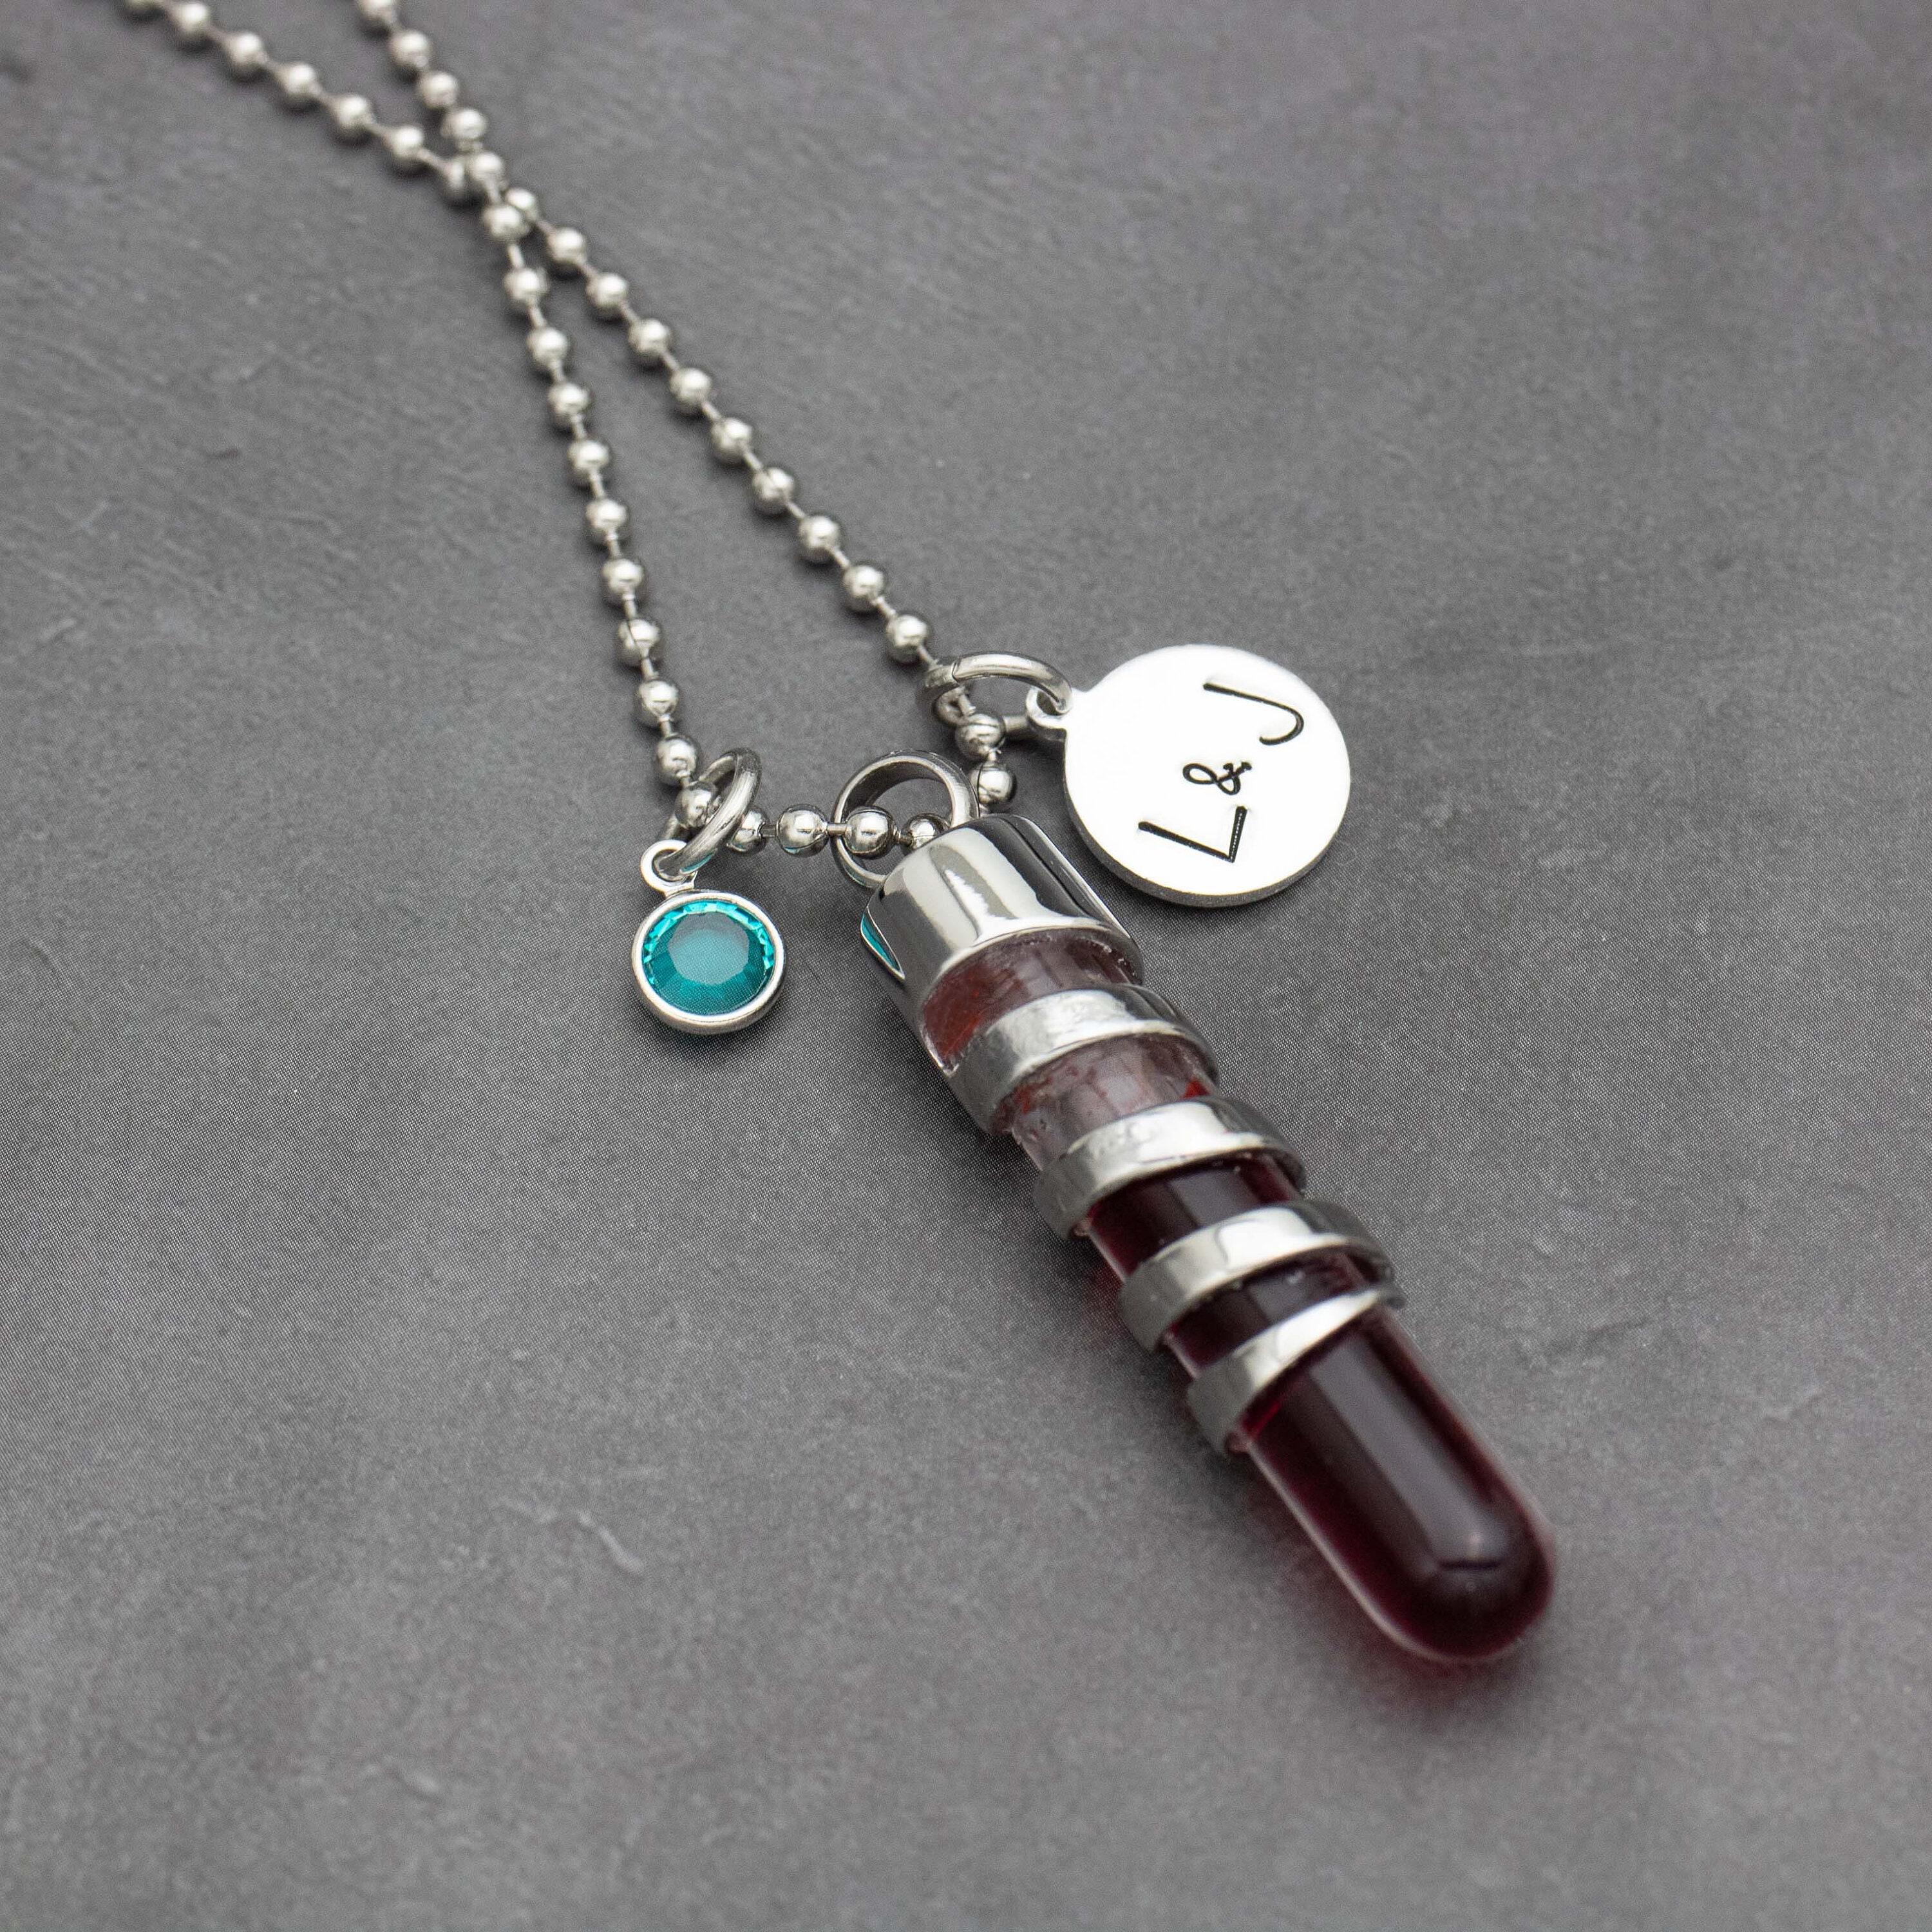 BLOOD VIAL NECKLACE - Etsy